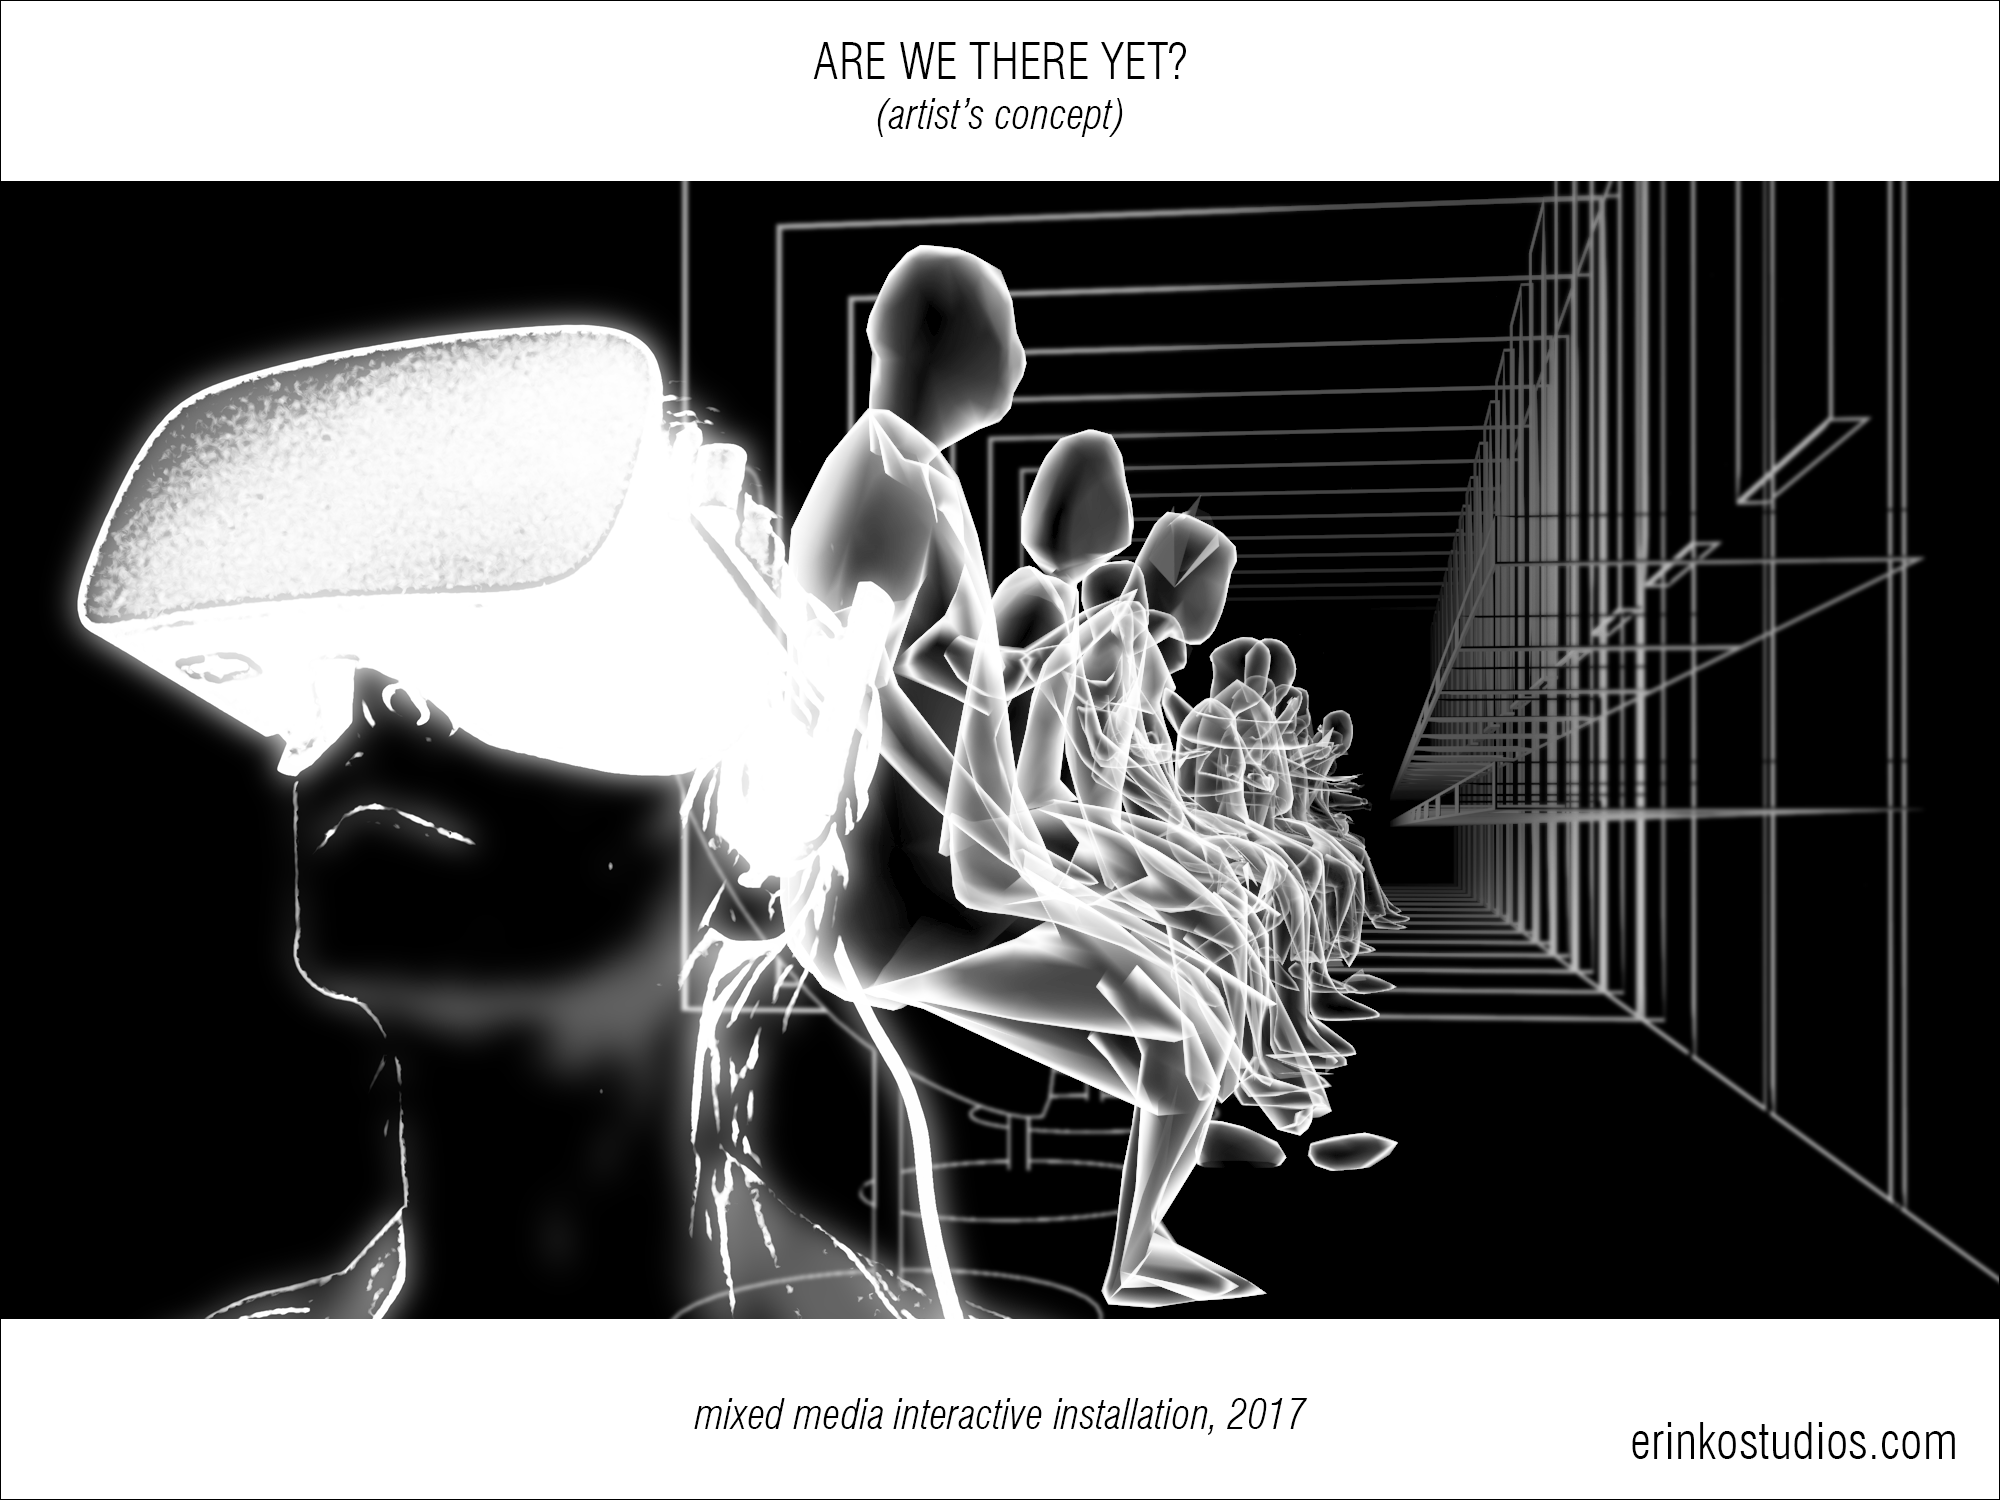 Erin Ko, "Are We There Yet"